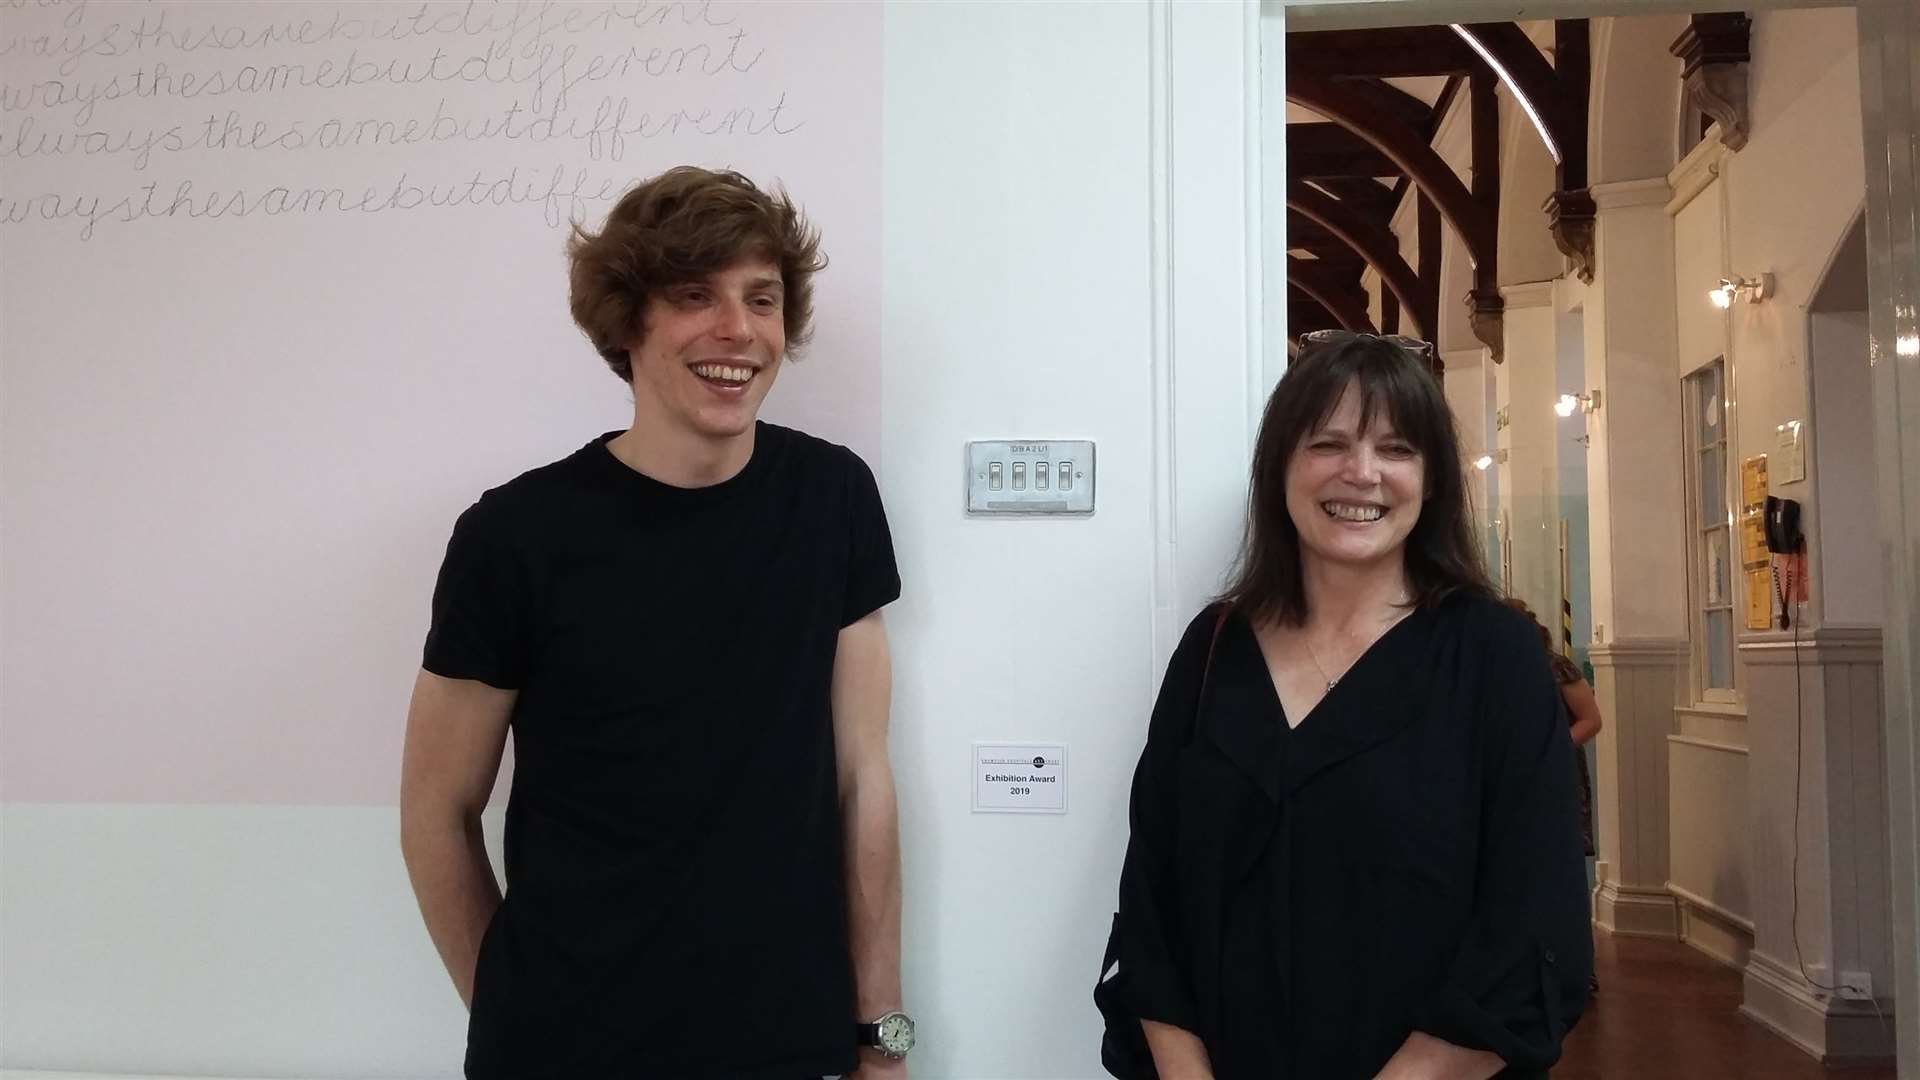 Kim and Sam Welch together at Kim's degree show, standing at her GHAT Exhibition Award.